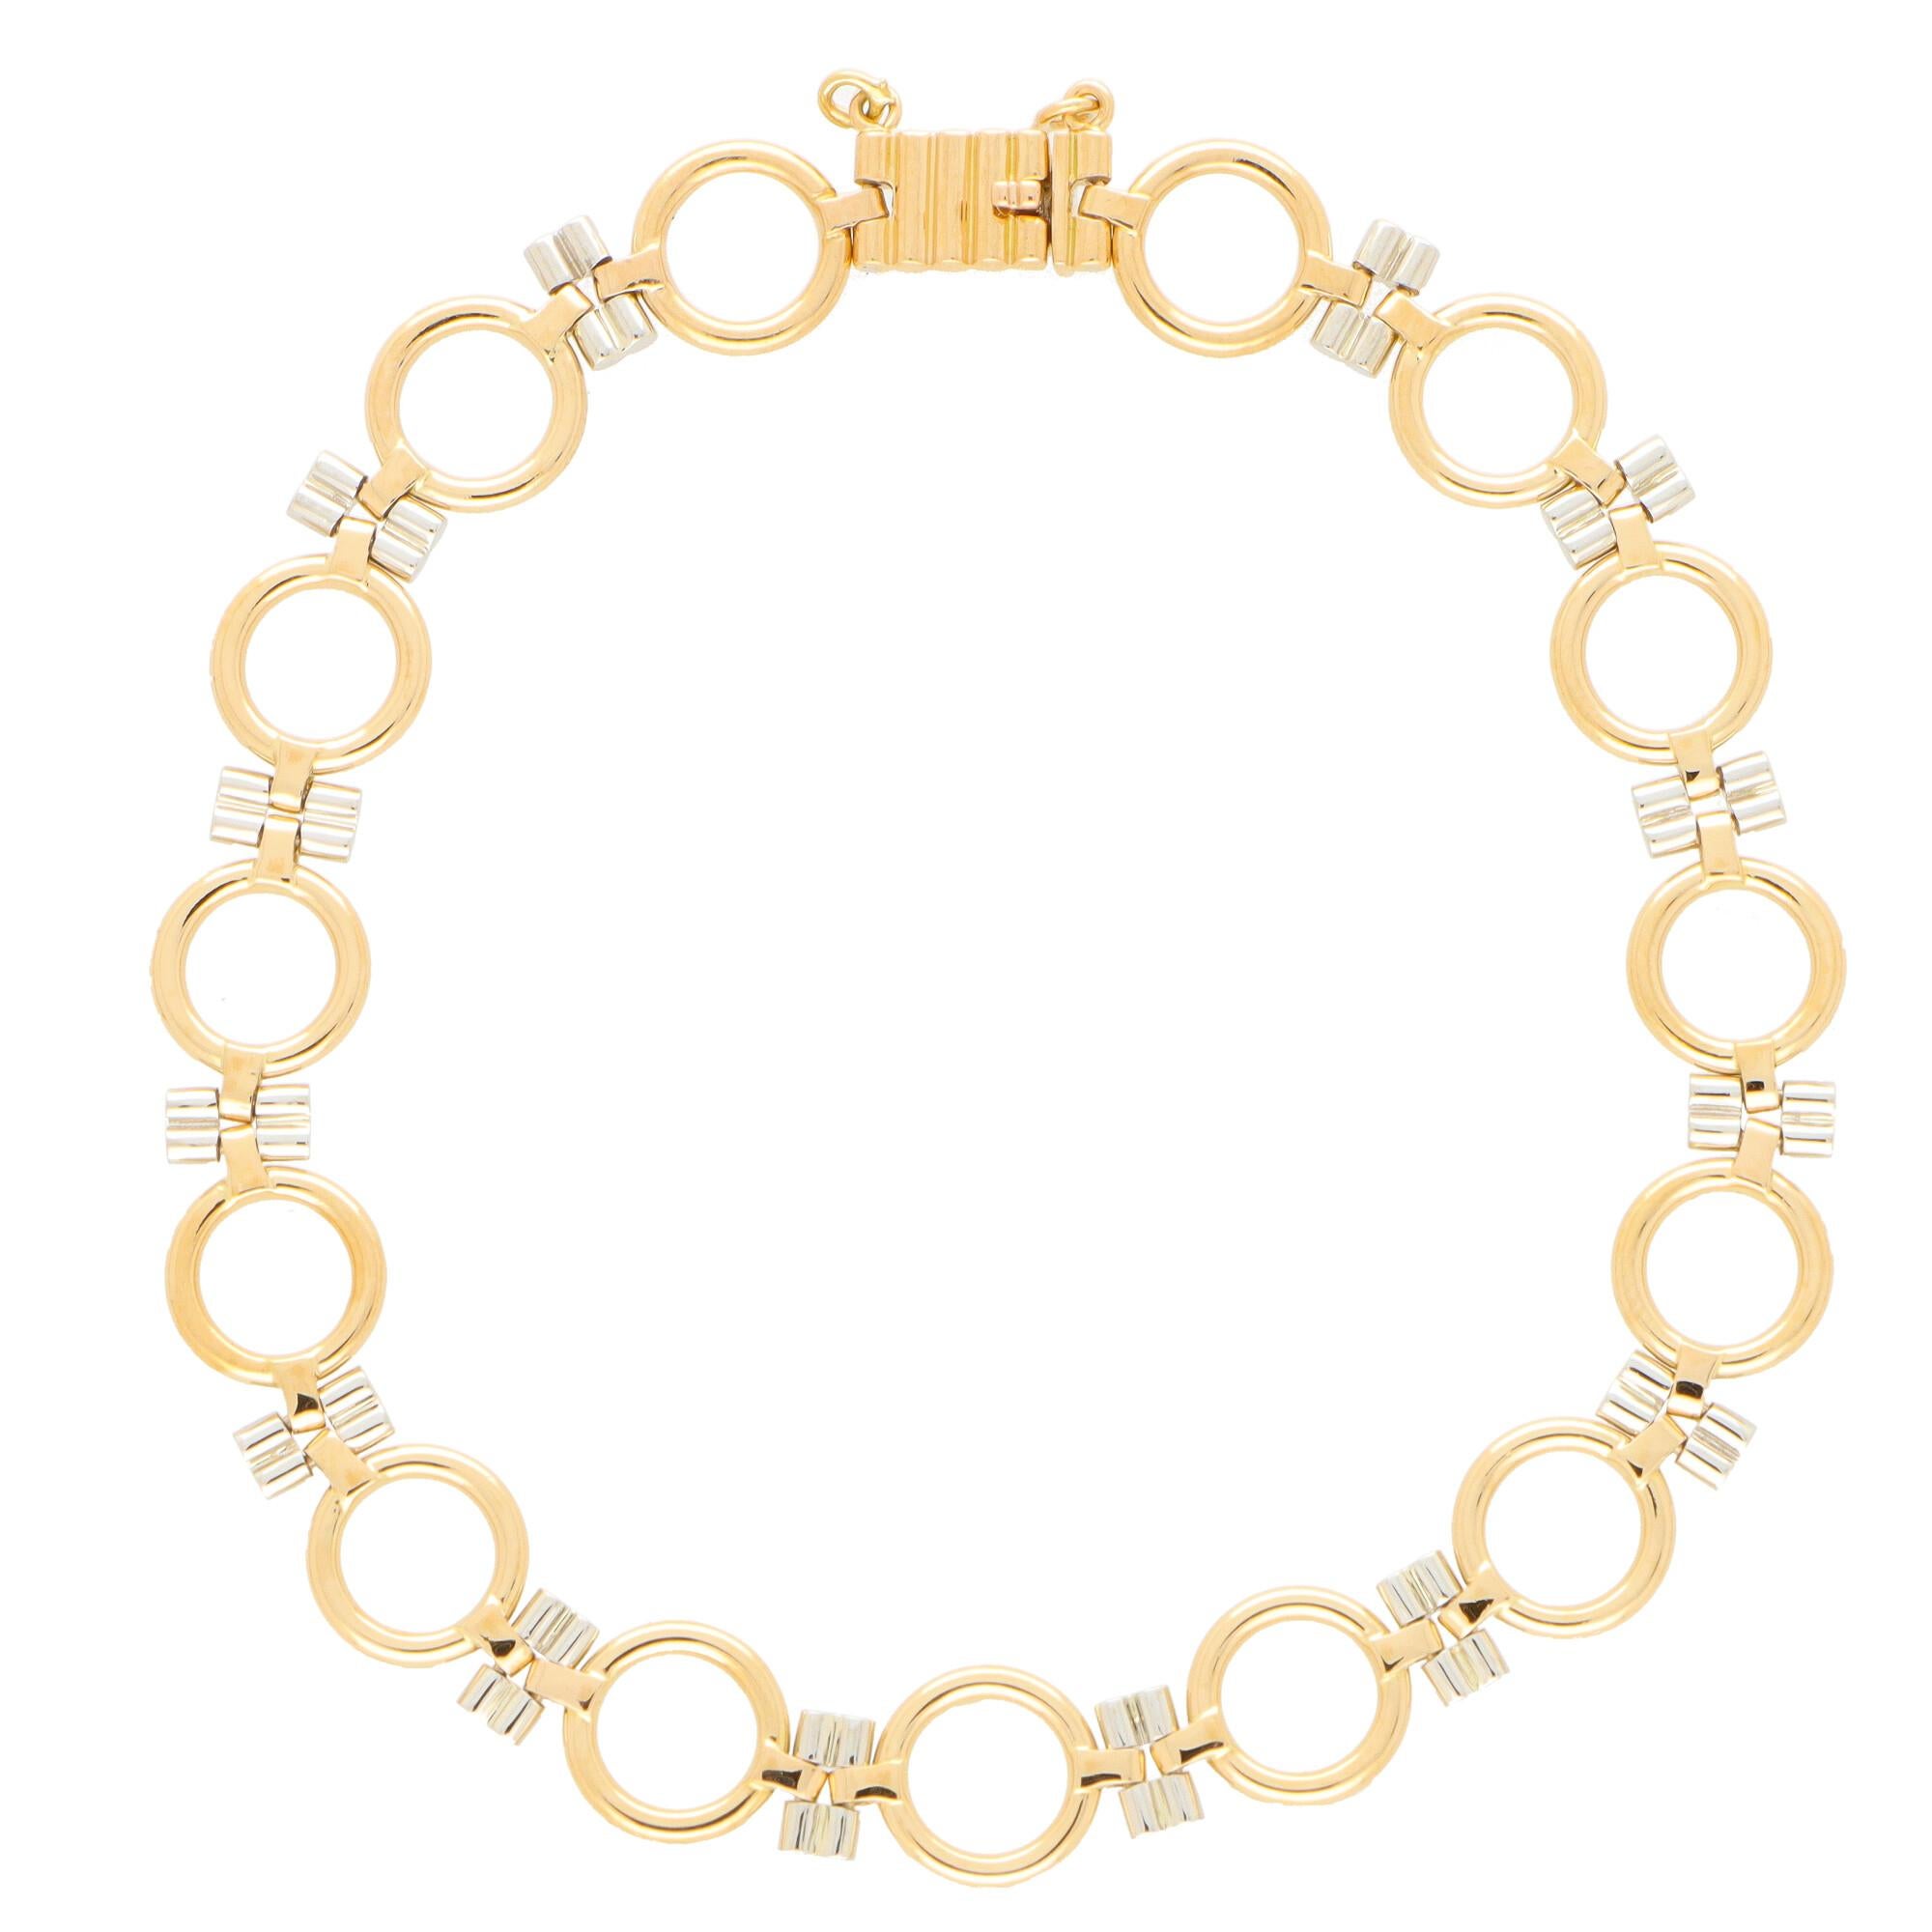 Retro Vintage Cartier Open Link Bracelet Set in 18k Yellow and White Gold